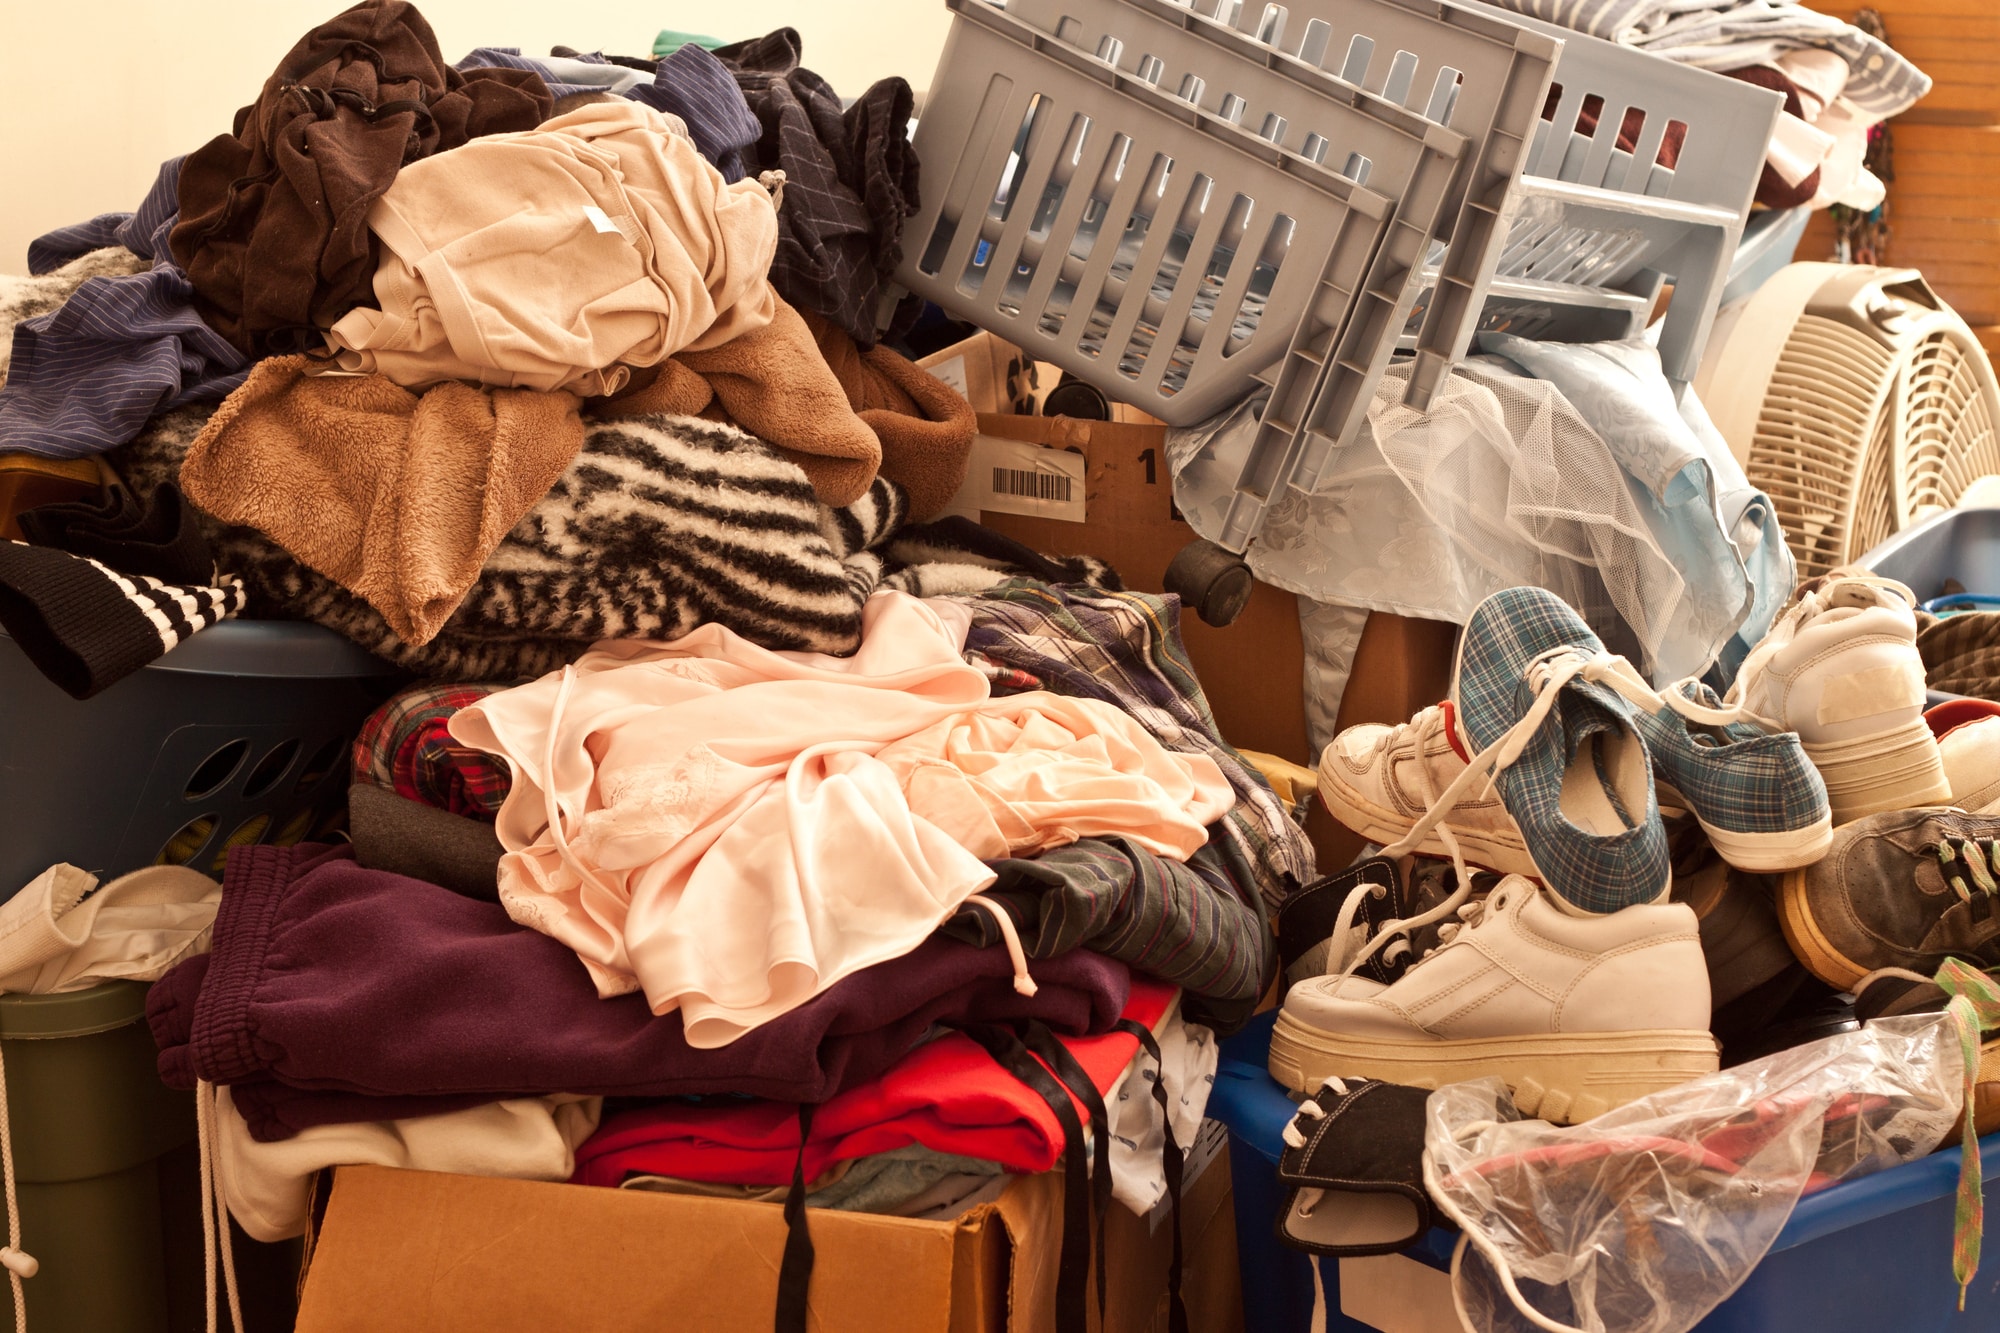 Large pile of clothes accumulated by a hoarder